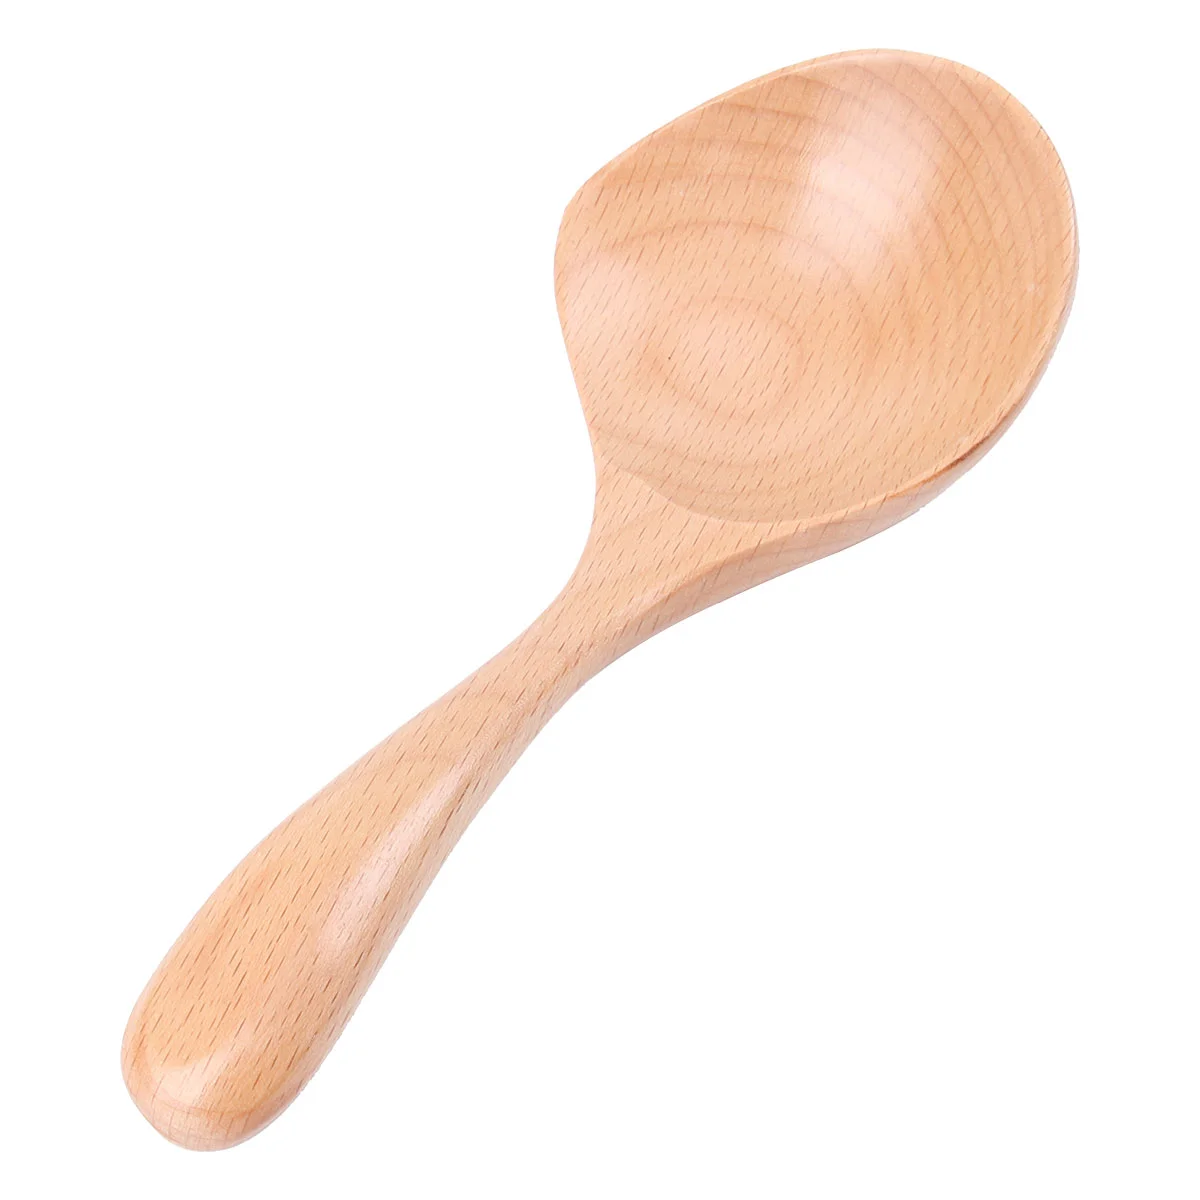 

1 pc Wooden Soup Spoons Hot Pot Spoon Stirring Spoon Wooden Serving Ladle Rice Server Spoon Ladle Spoon